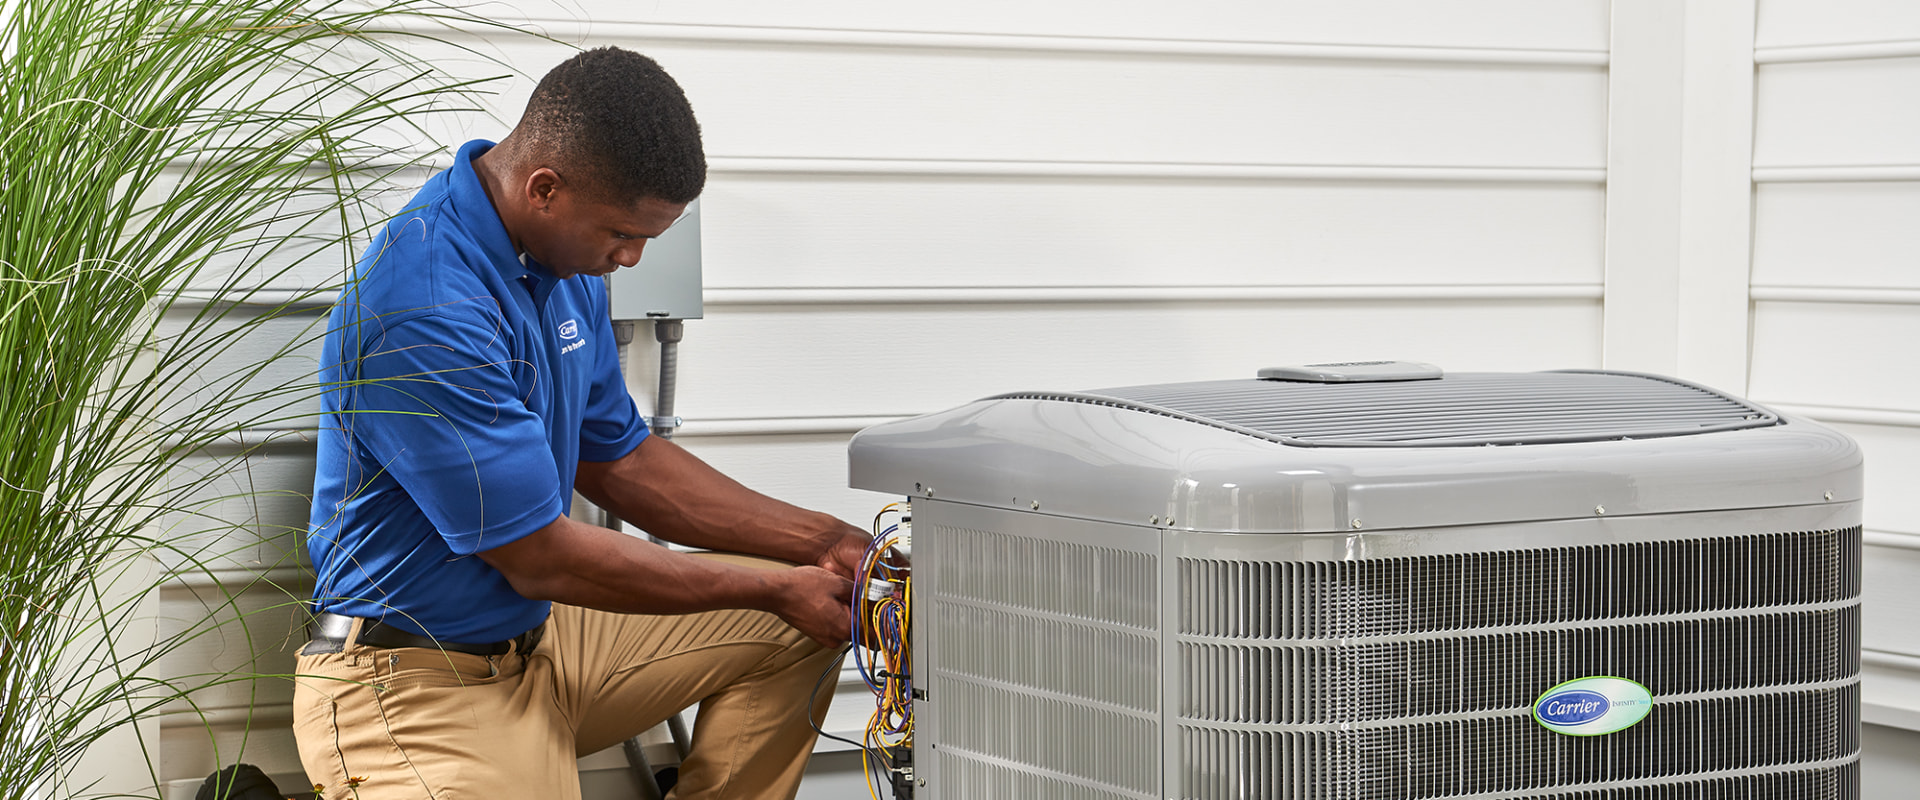 How to Maximize the Life Expectancy of Your Air Conditioner